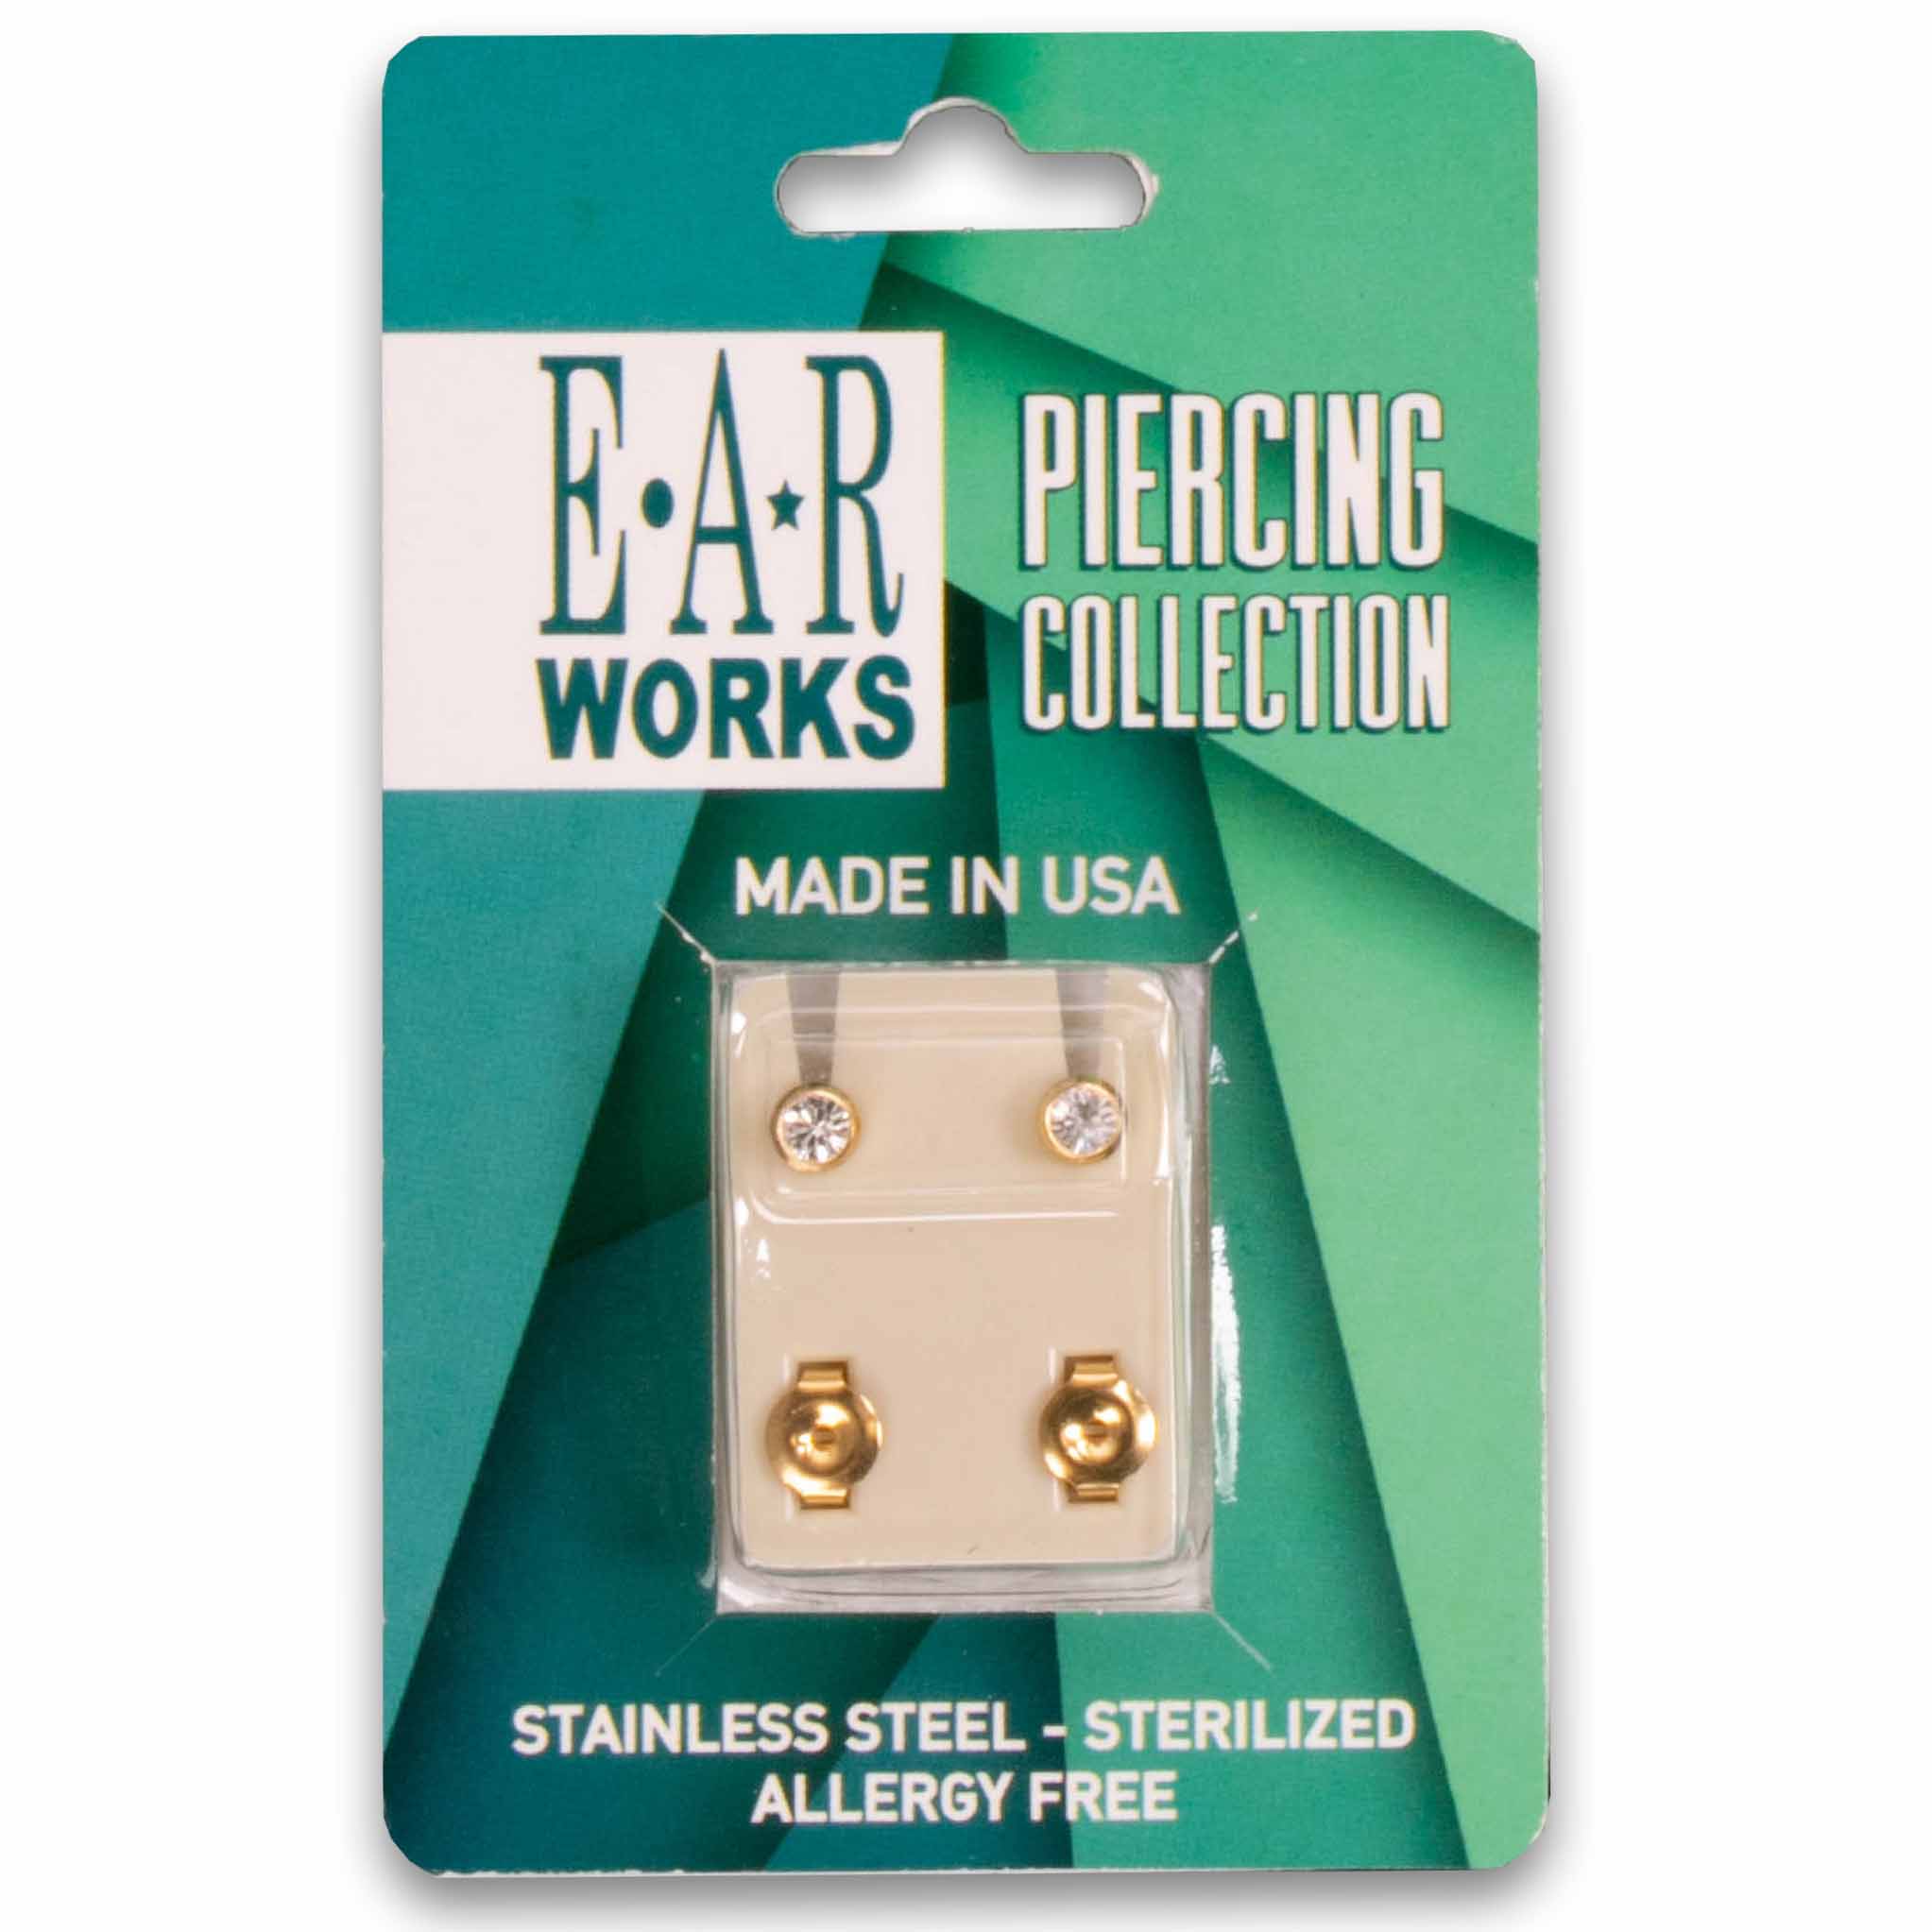 EAR Works, Stainless Steel Gold Plated Earrings - Large April Crystal Bezel - Cosmetic Connection